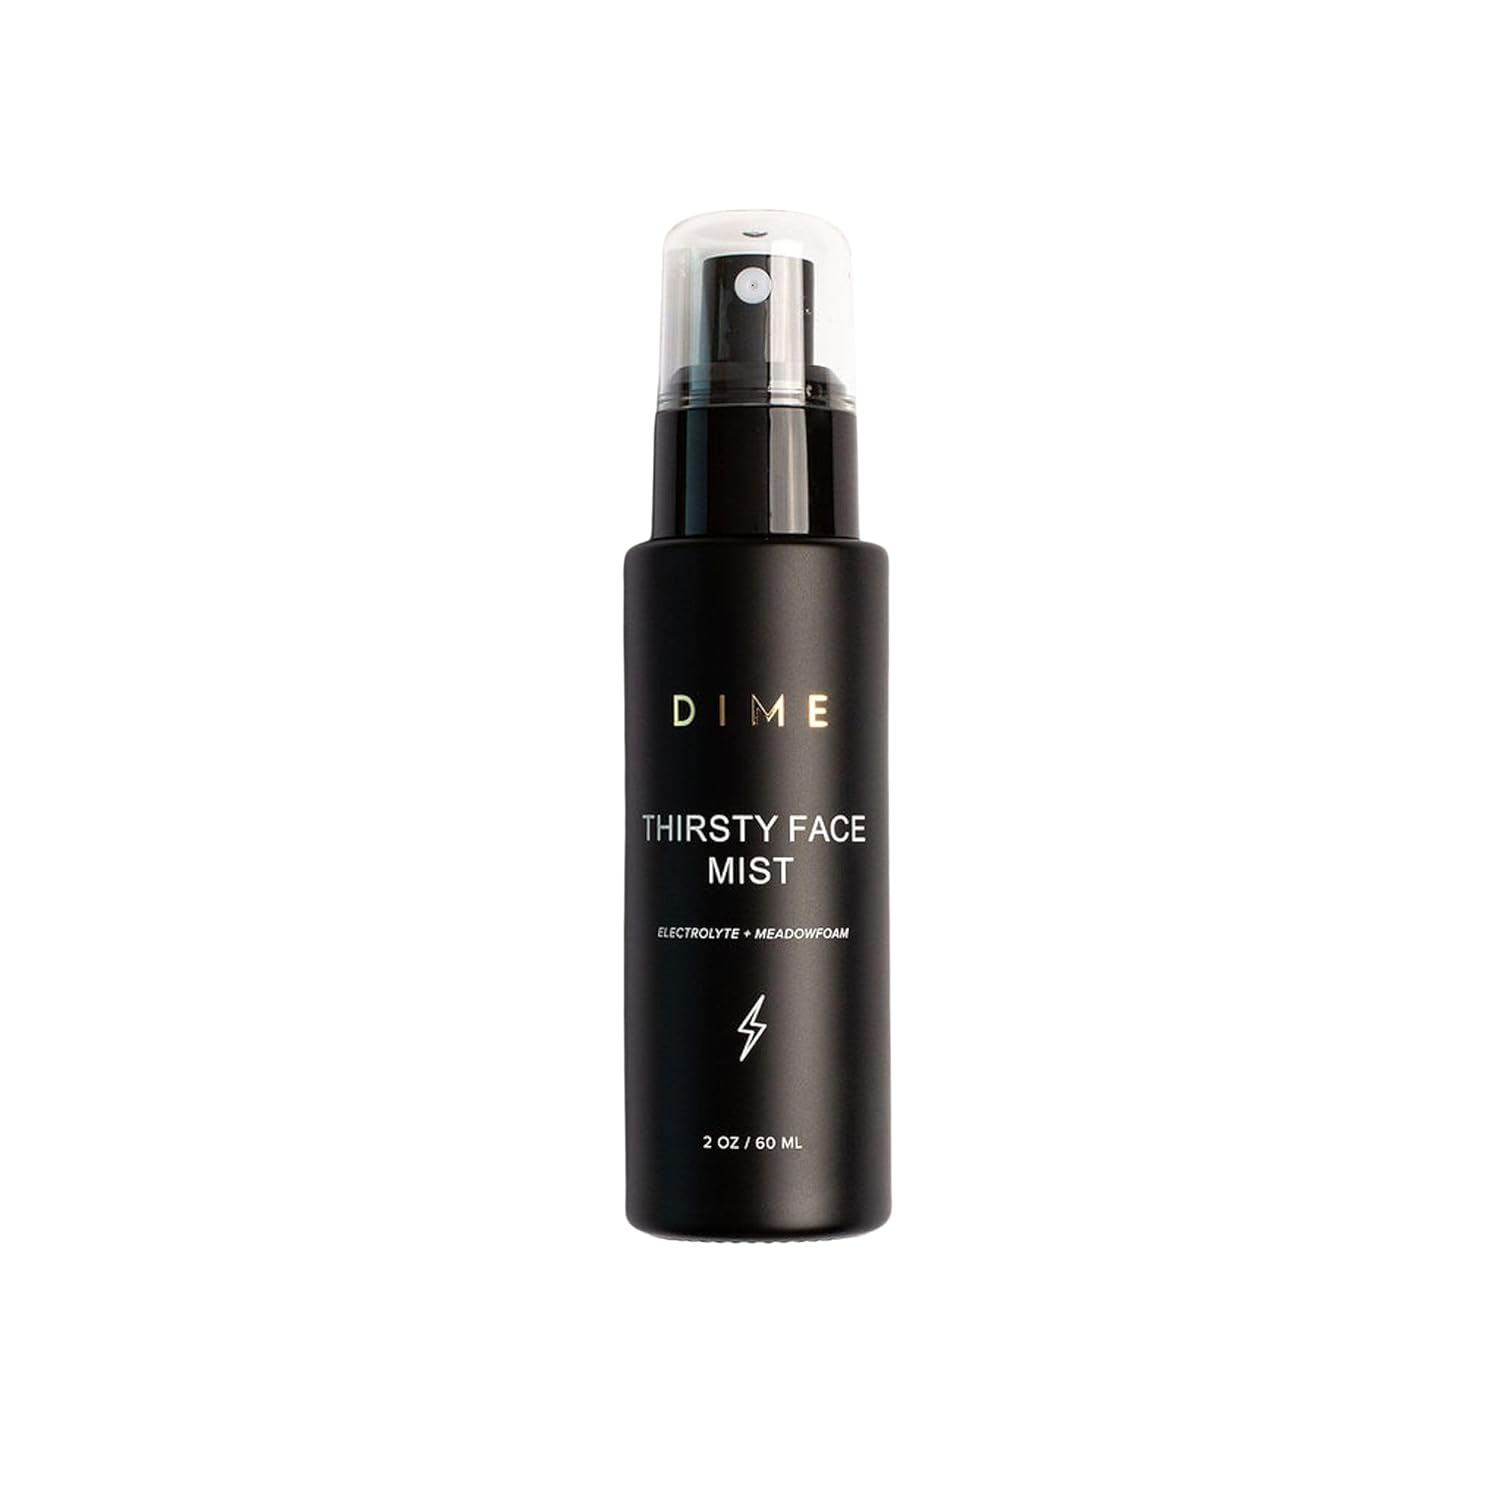 DIME Beauty Thirsty Face Mist with Electrolytes and Antioxidants and Blue Light Protection, Hydrates and Protects Skin, 2